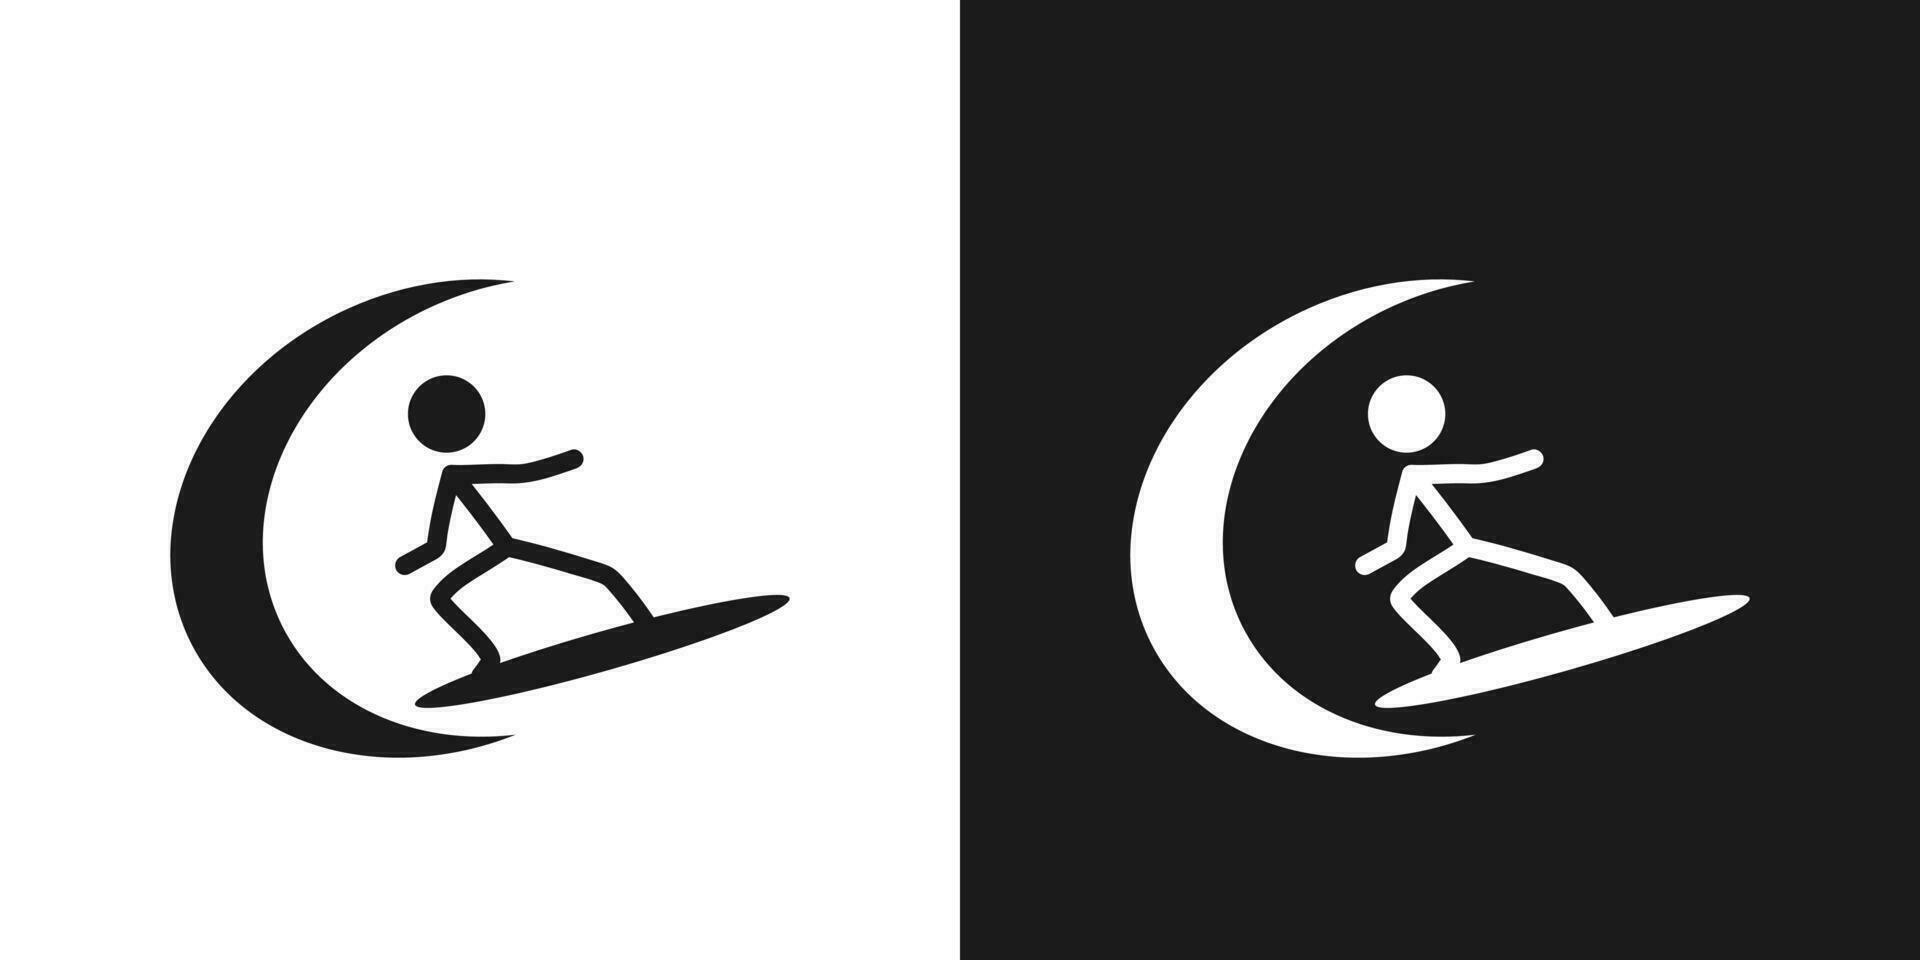 Surfing icon pictogram vector design. Stick figure man surfer on the surfing board and waves vector icon sign symbol pictogram. Water sports concept